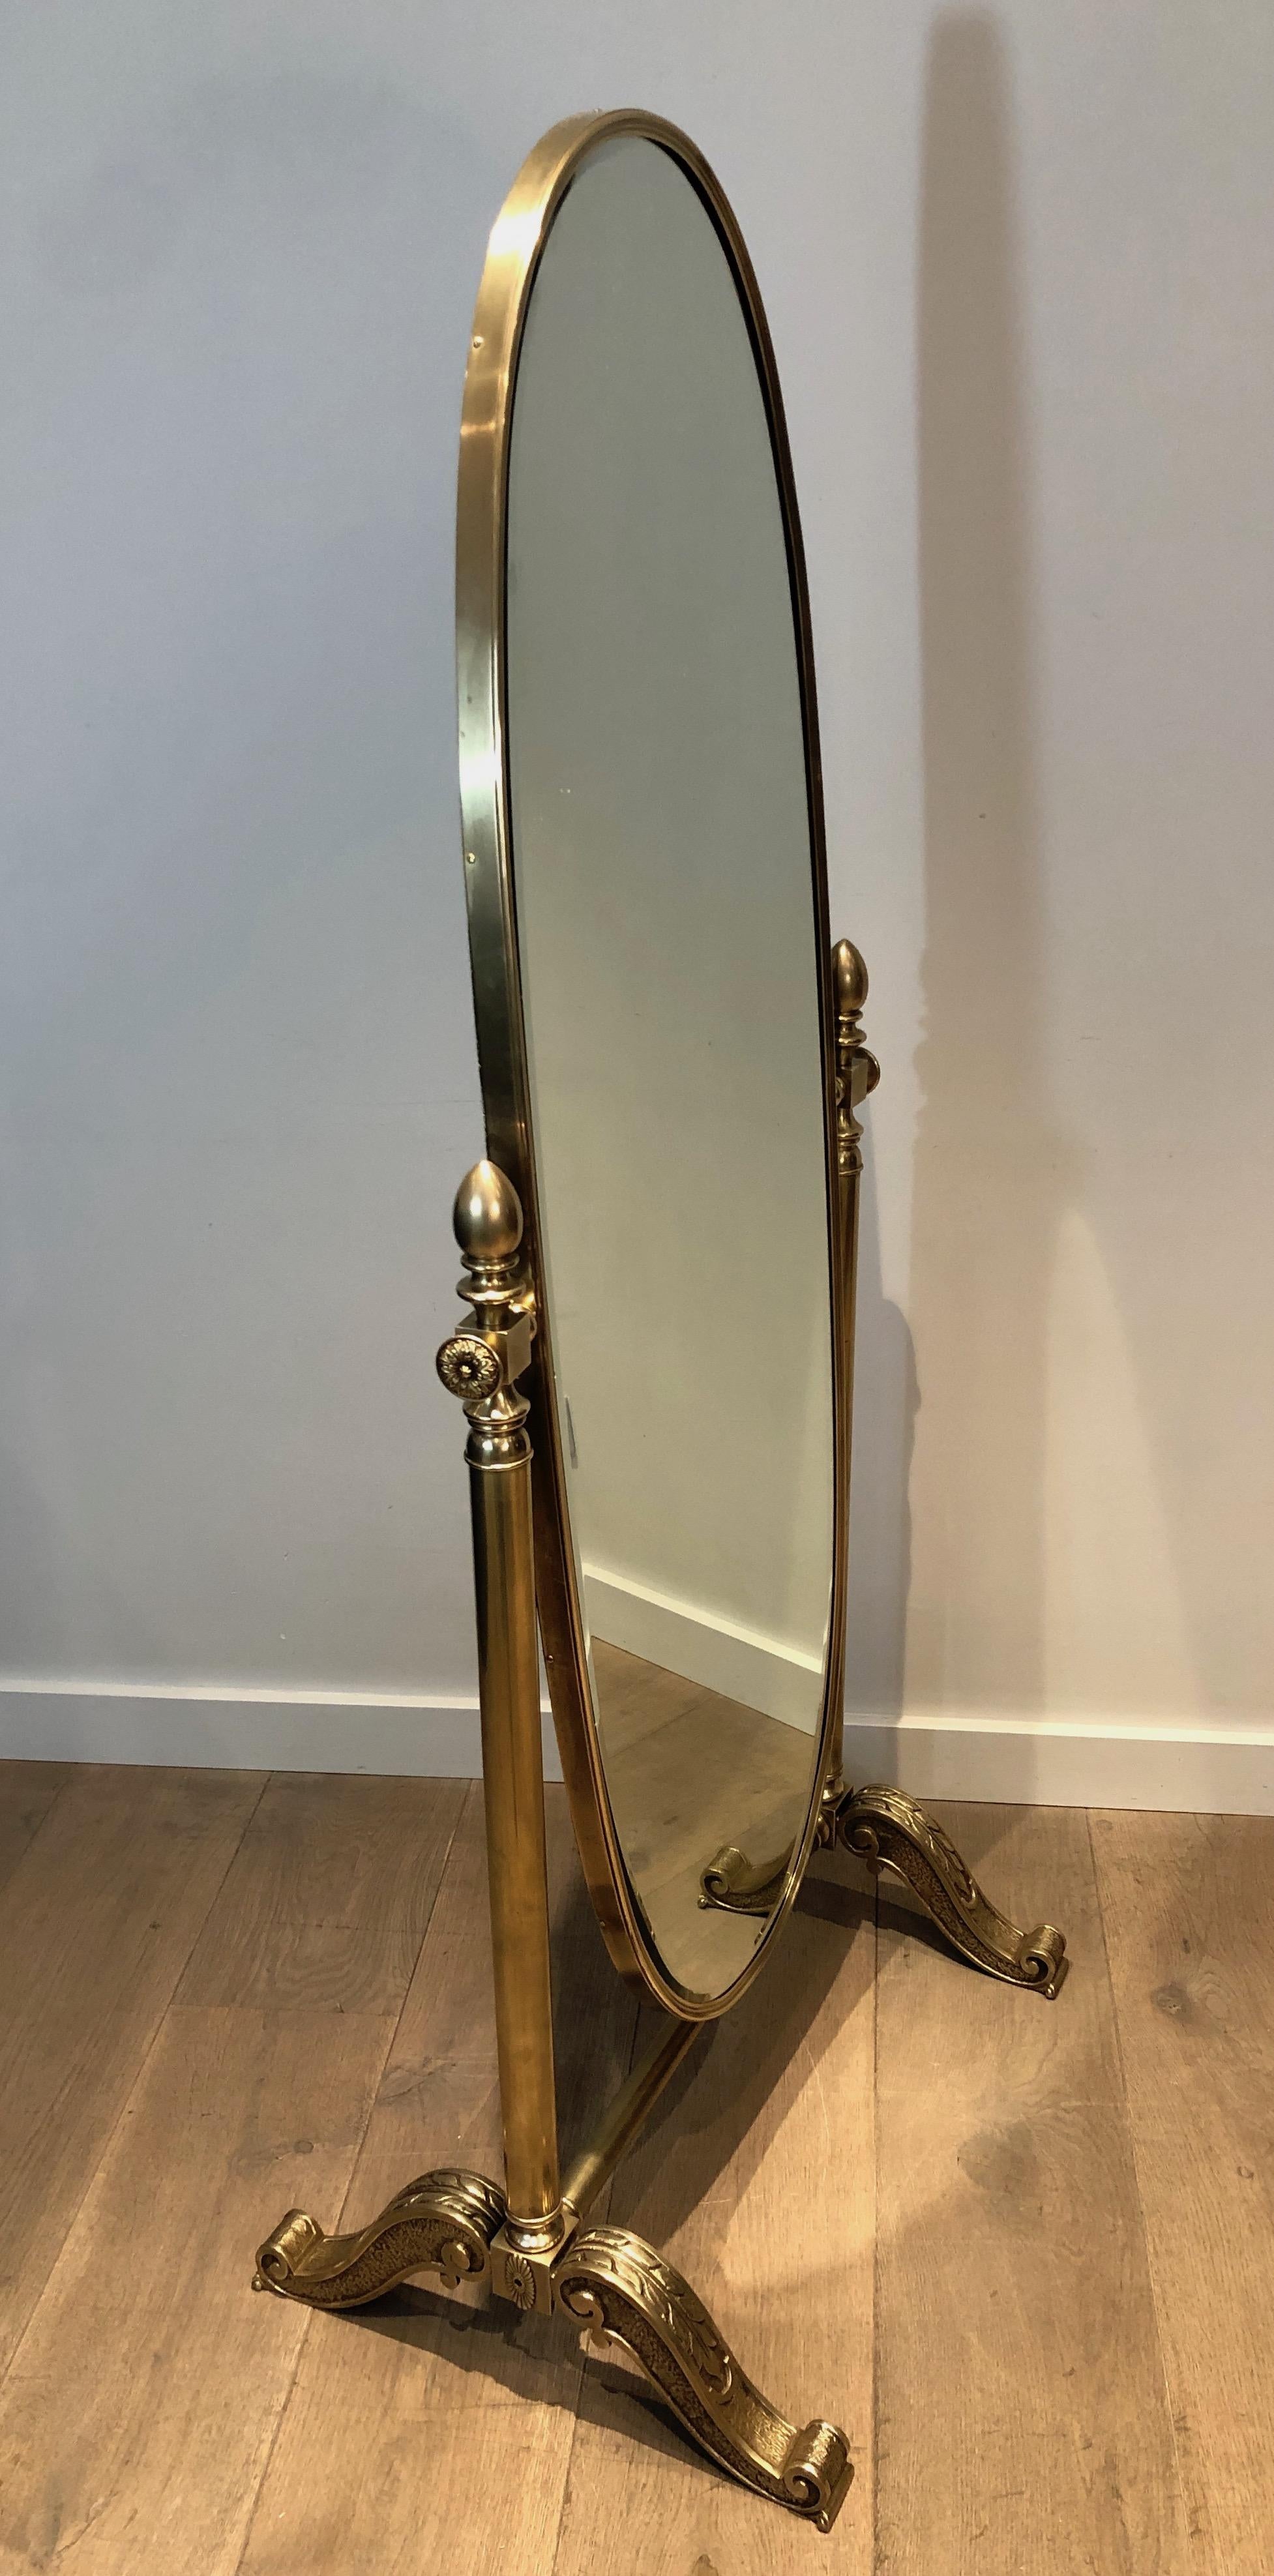 This important Empire style Psyche mirror is made of bronze and brass. This is a French work, circa 1880.